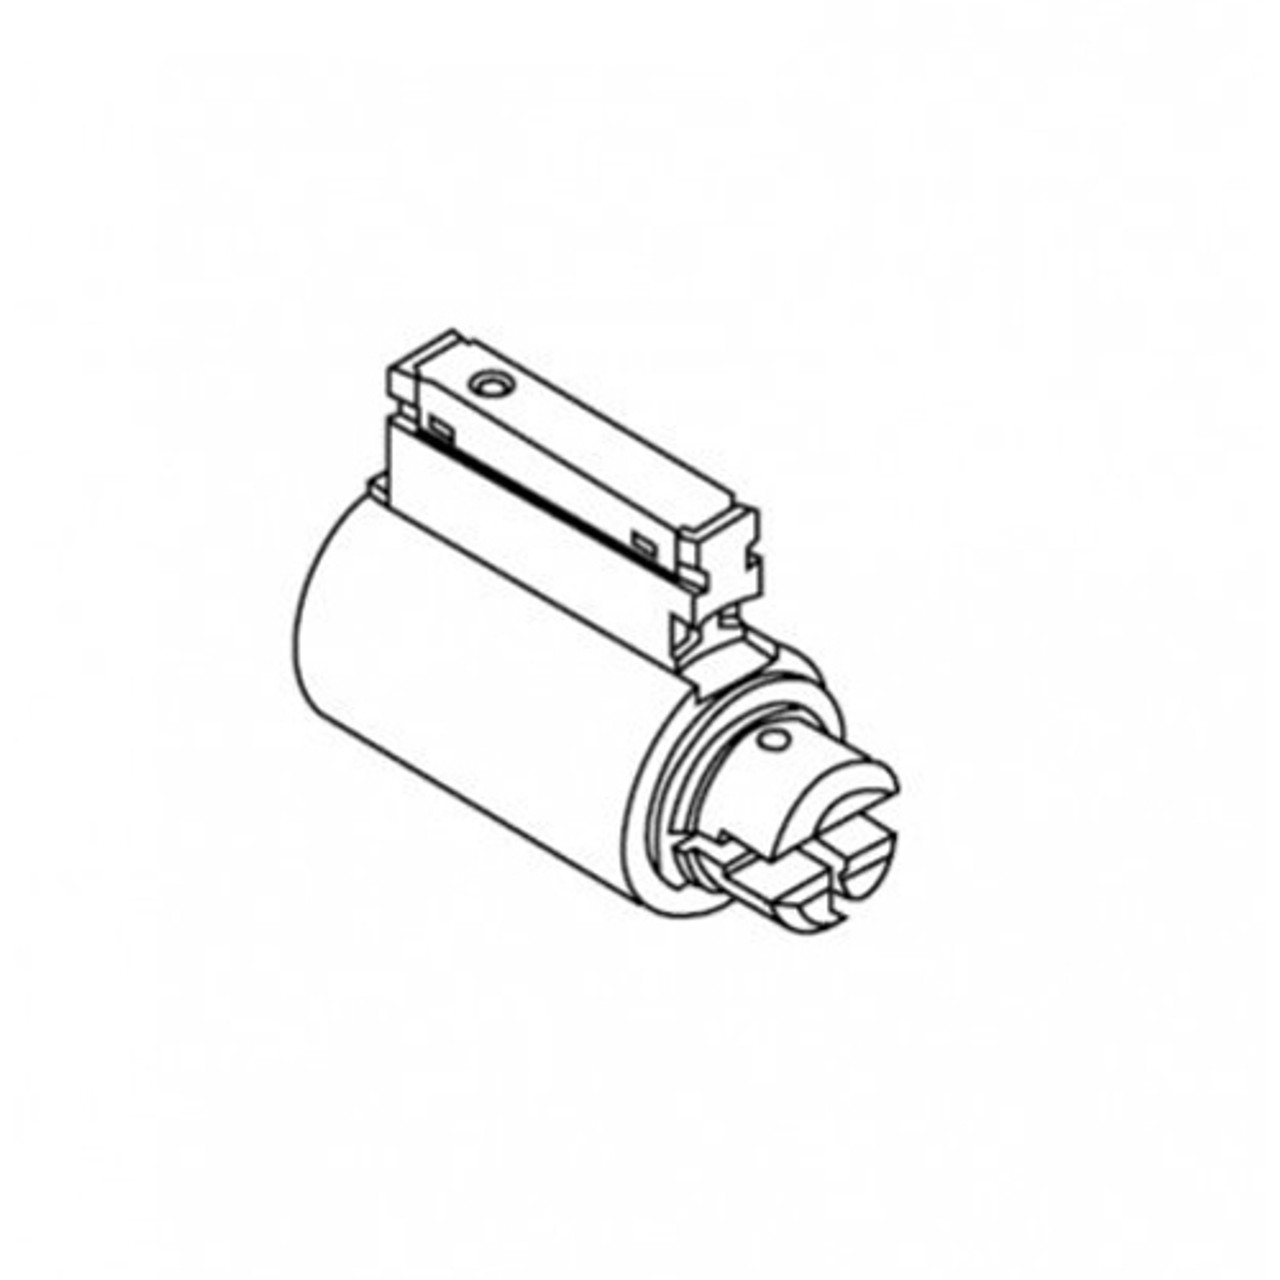 CR2000-052-59B1-626 Corbin Russwin Conventional Key in Lever Cylinder in Satin Chrome Finish